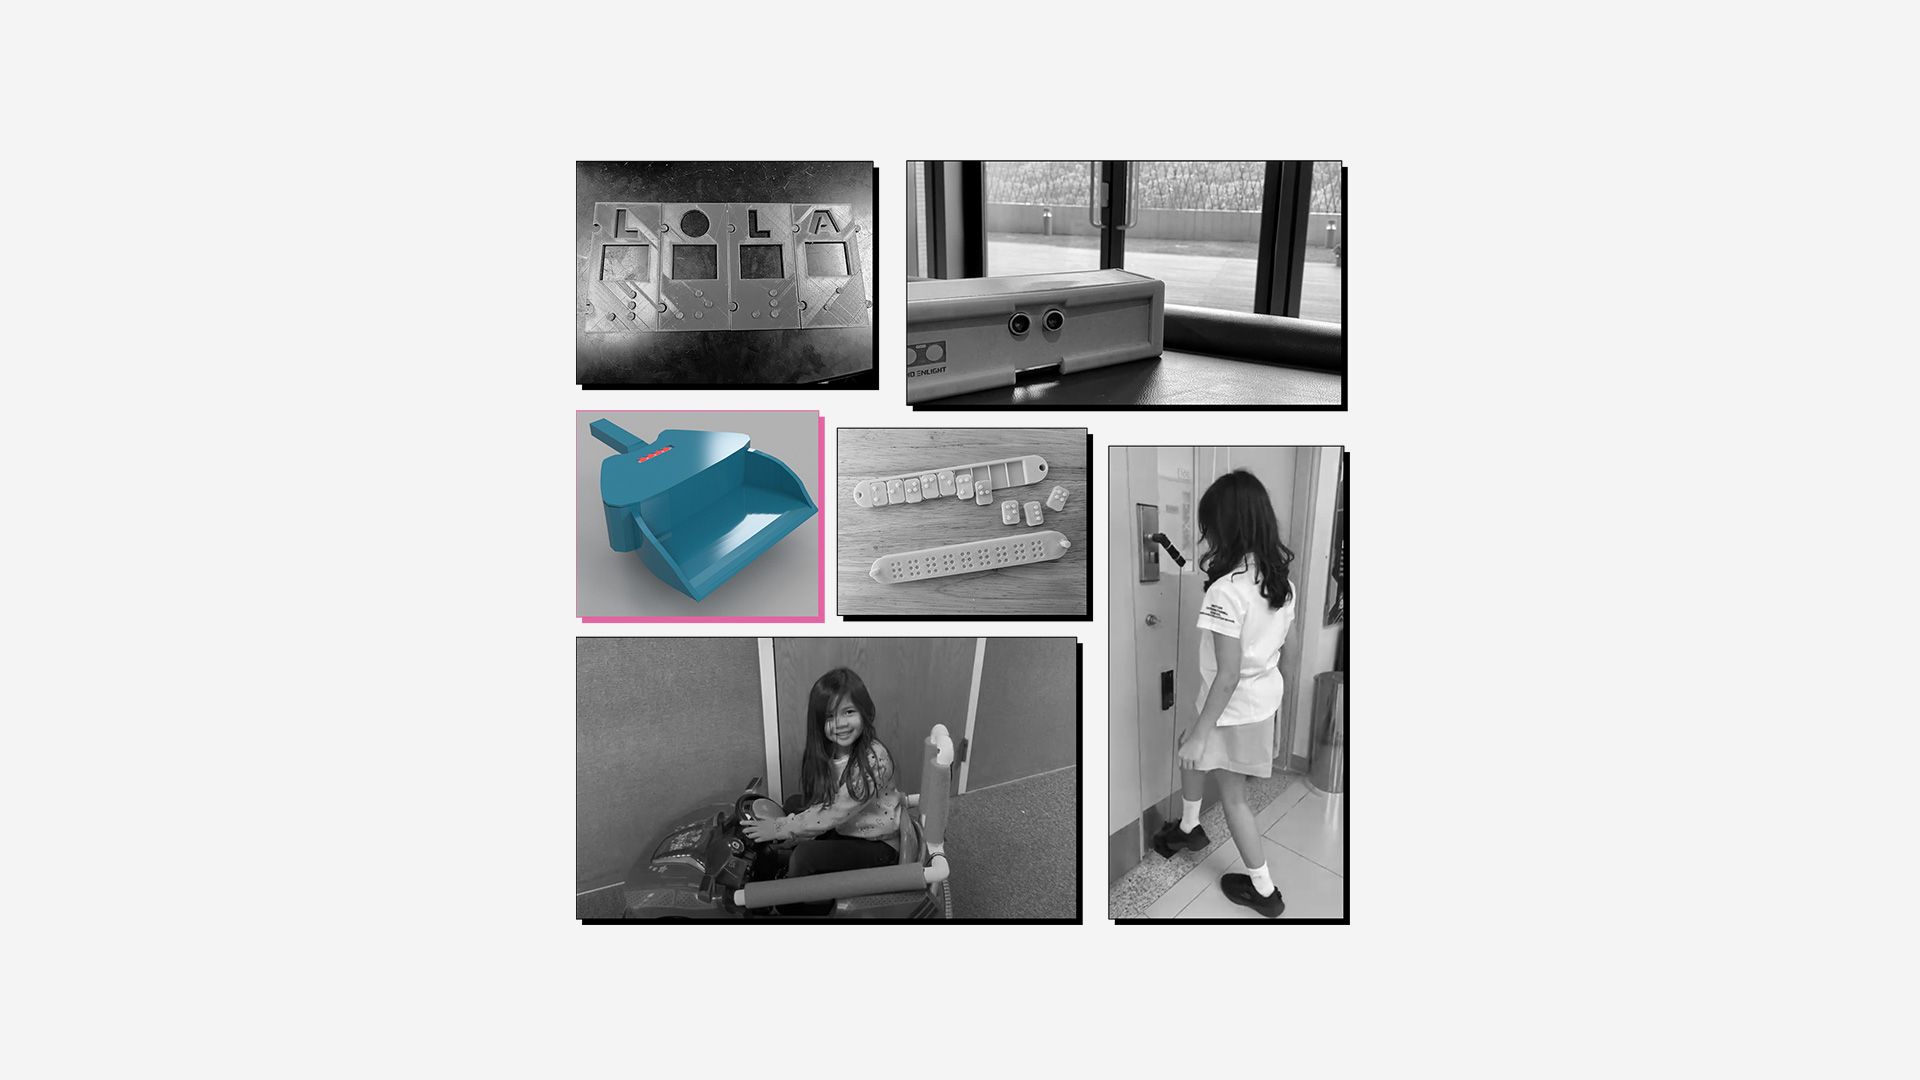 Collage of 3D printed assistive devices with winning entry (dust detector dustpan) highlighted.